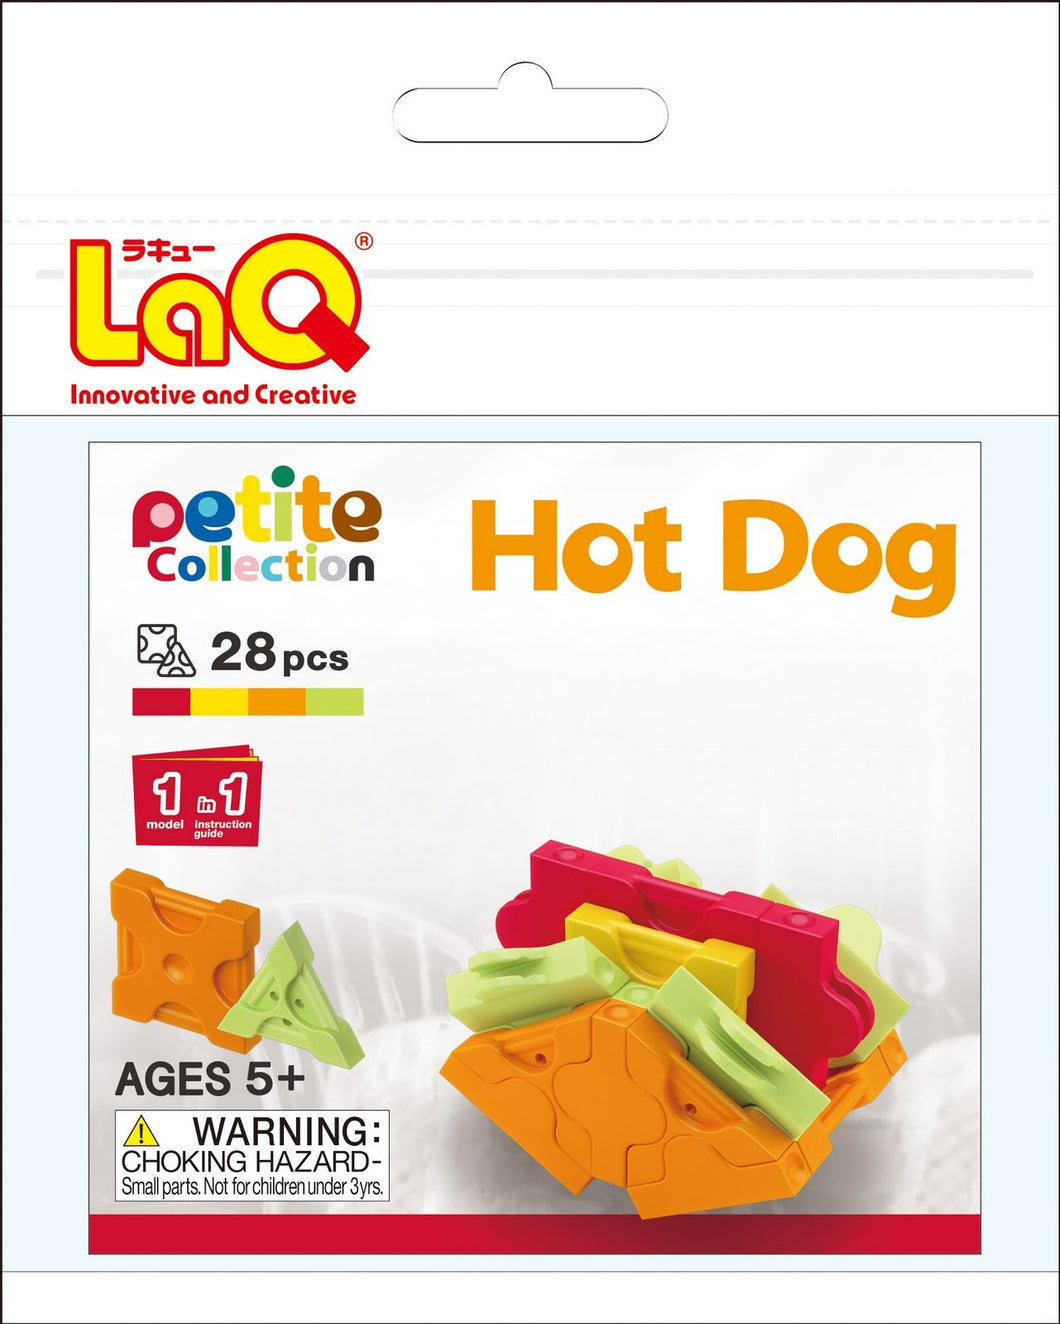 Hot dog set package featured in the LaQ petite set